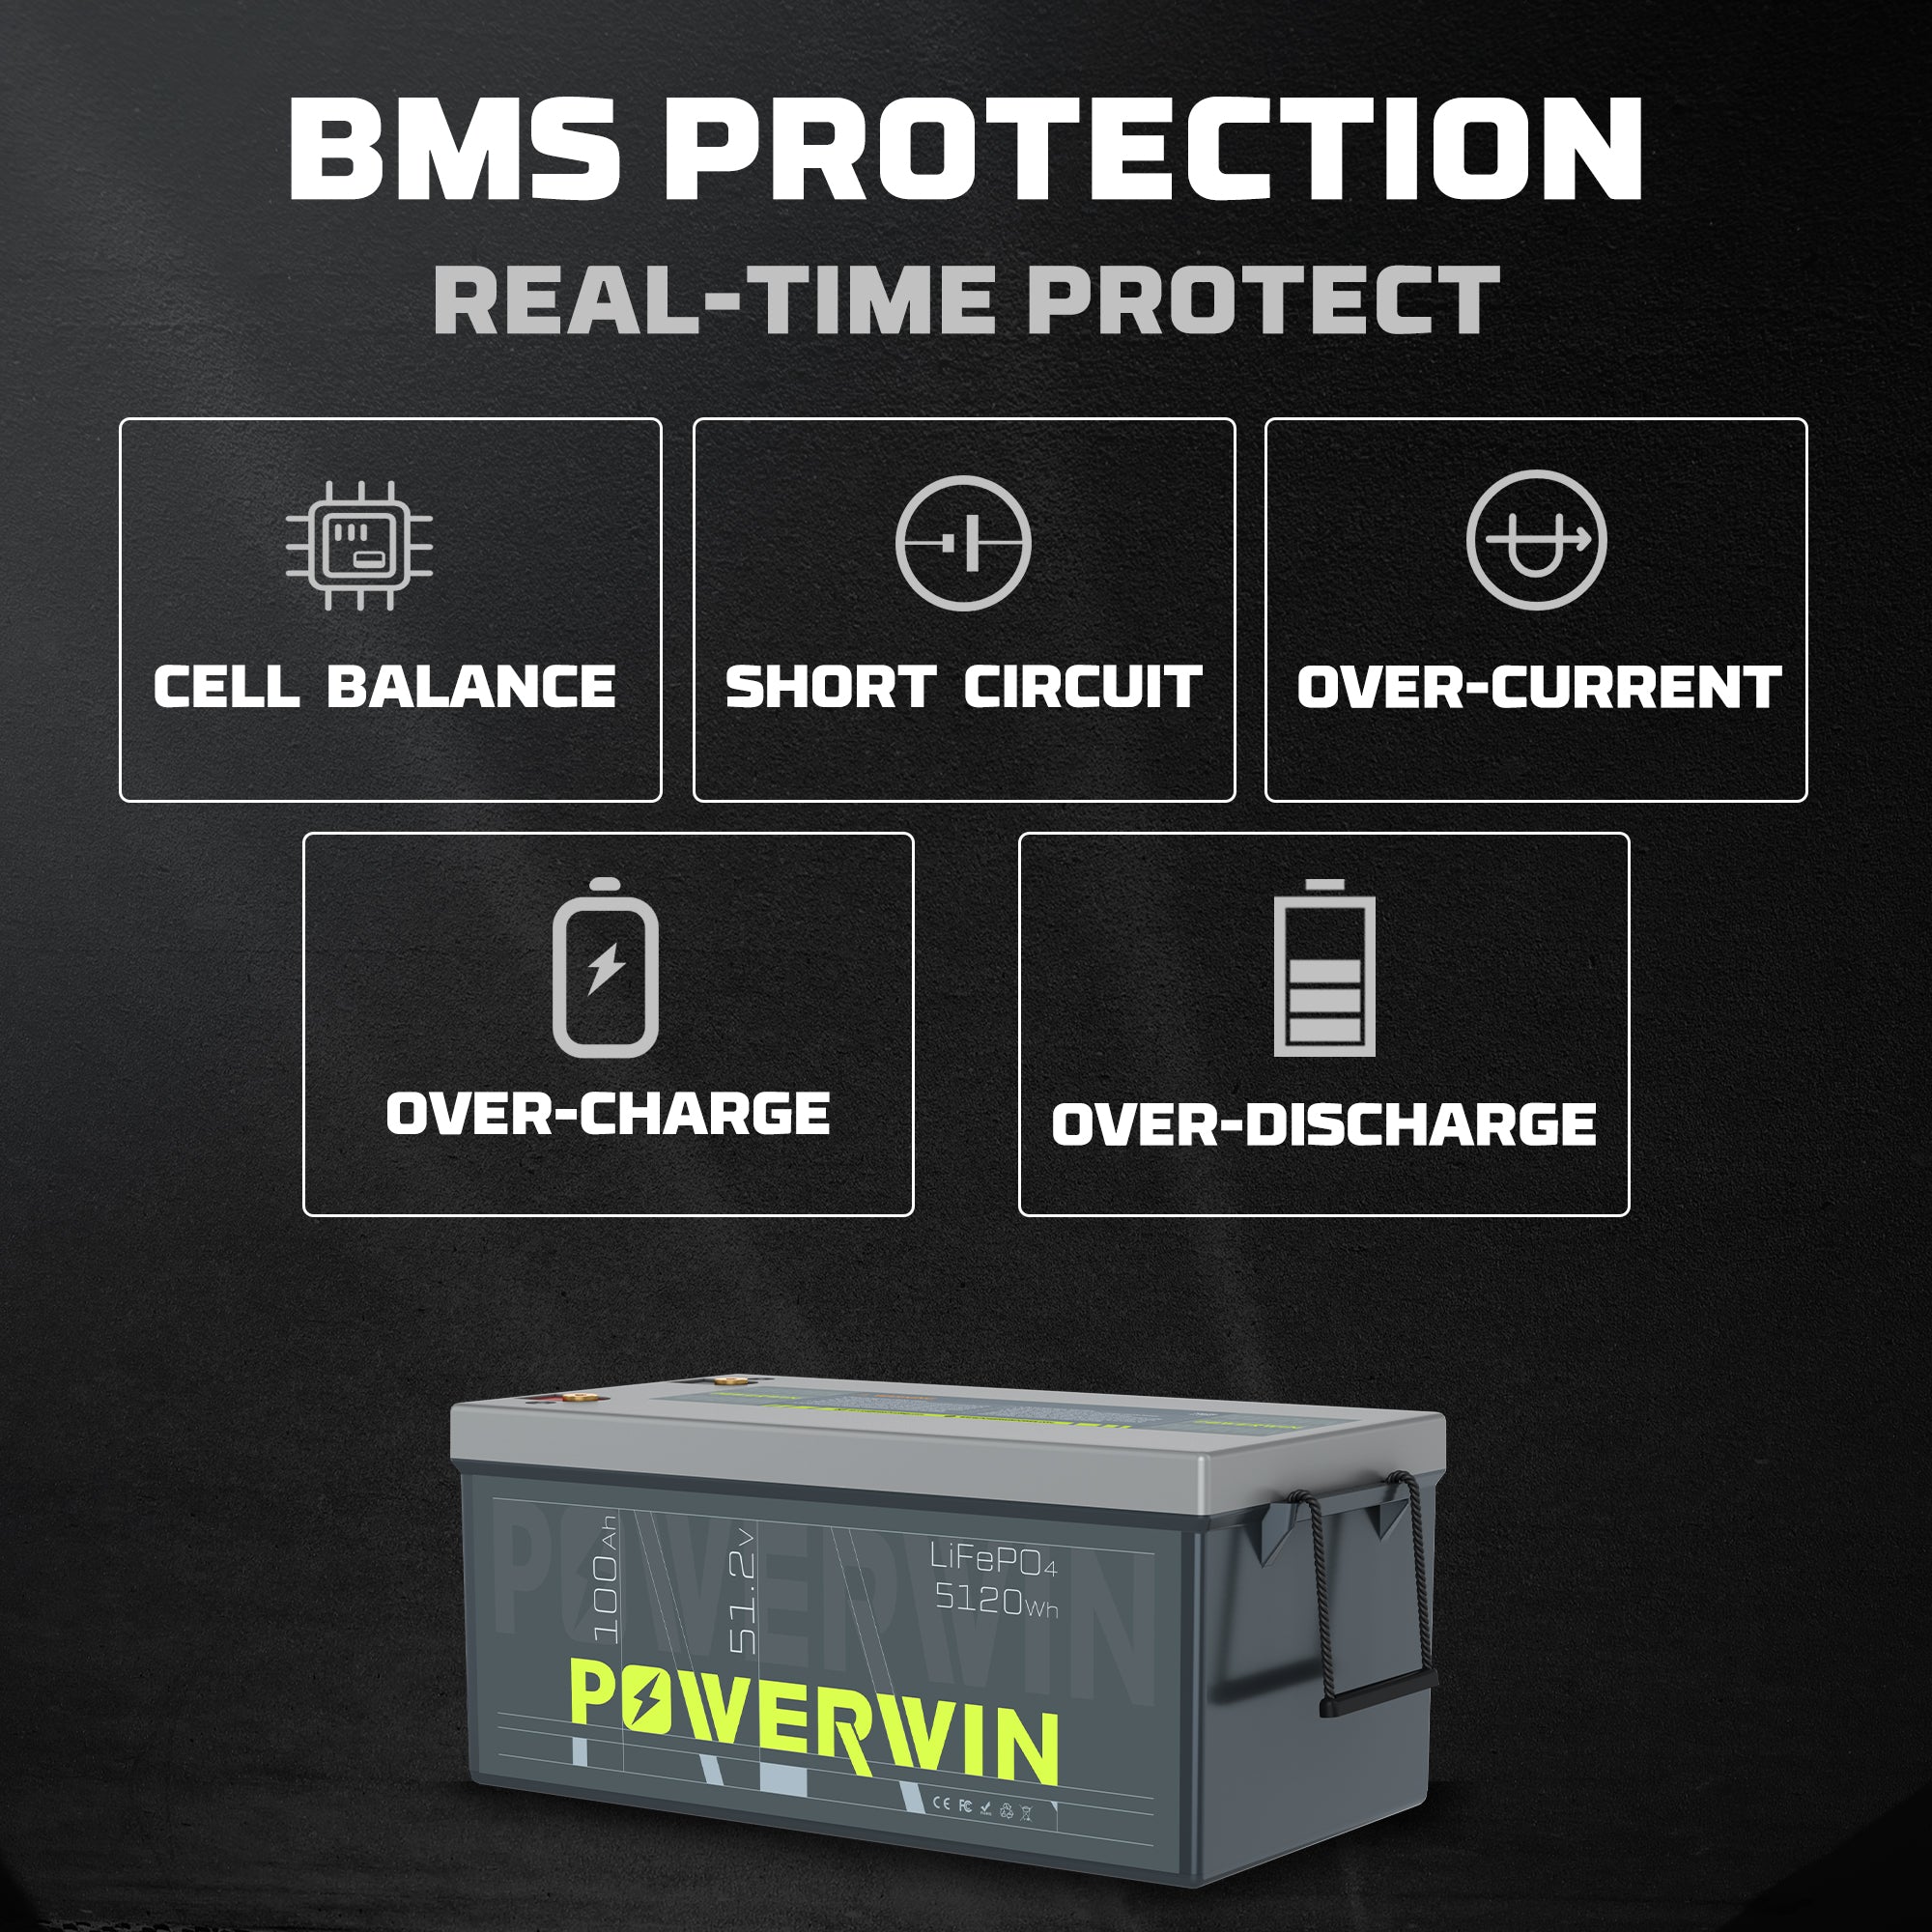 POWERWIN BT5120 48V 100Ah 5120Wh Lithium Battery 4 Pack 20480Wh